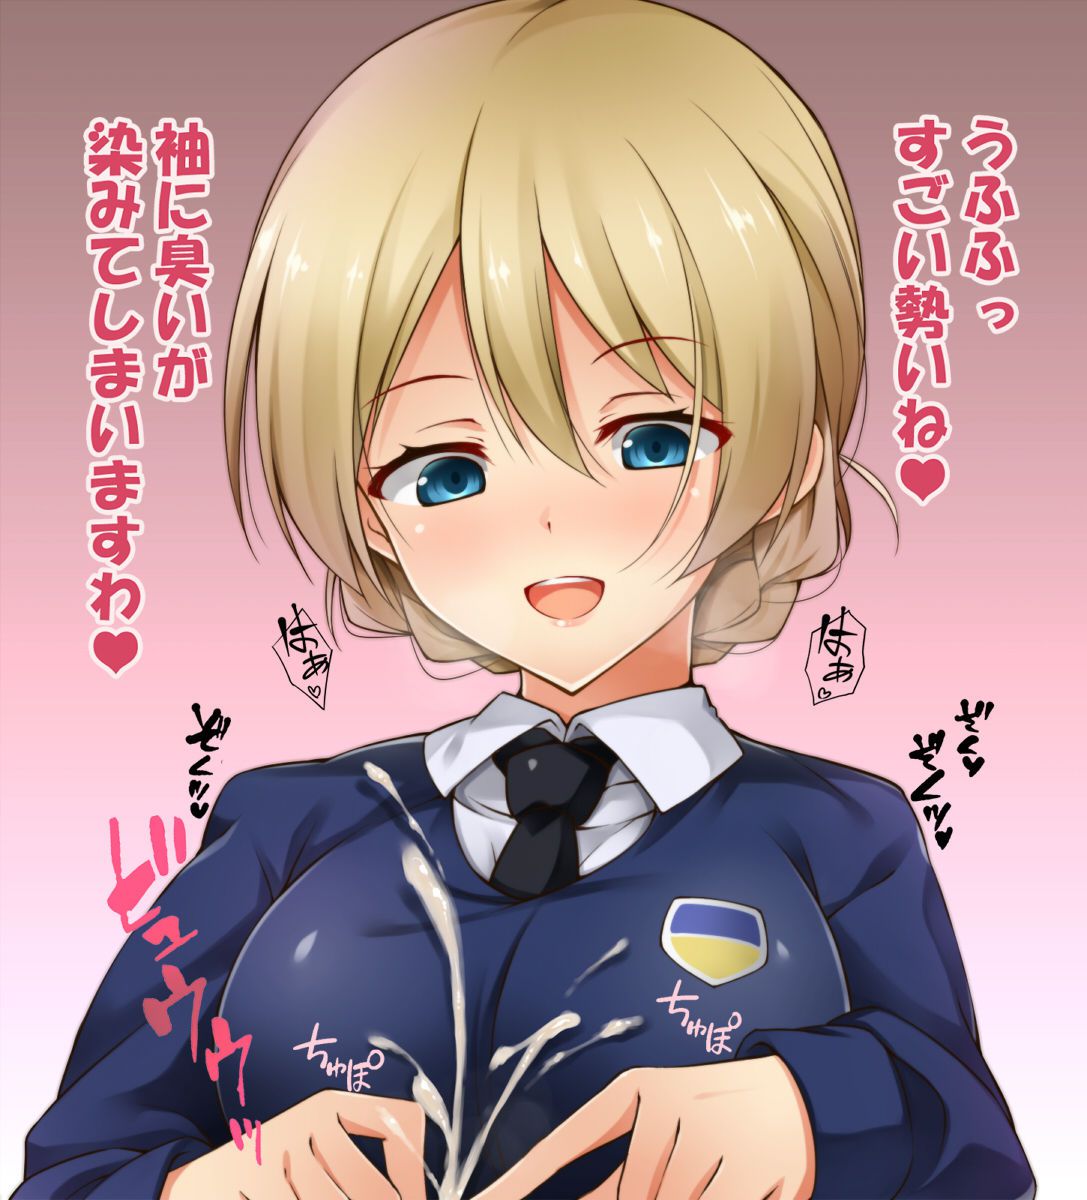 Darjeeling's ejaculation control ww sandwich, cucumber in to tuck the good juice out girls & Panzer 2 erotic images 24